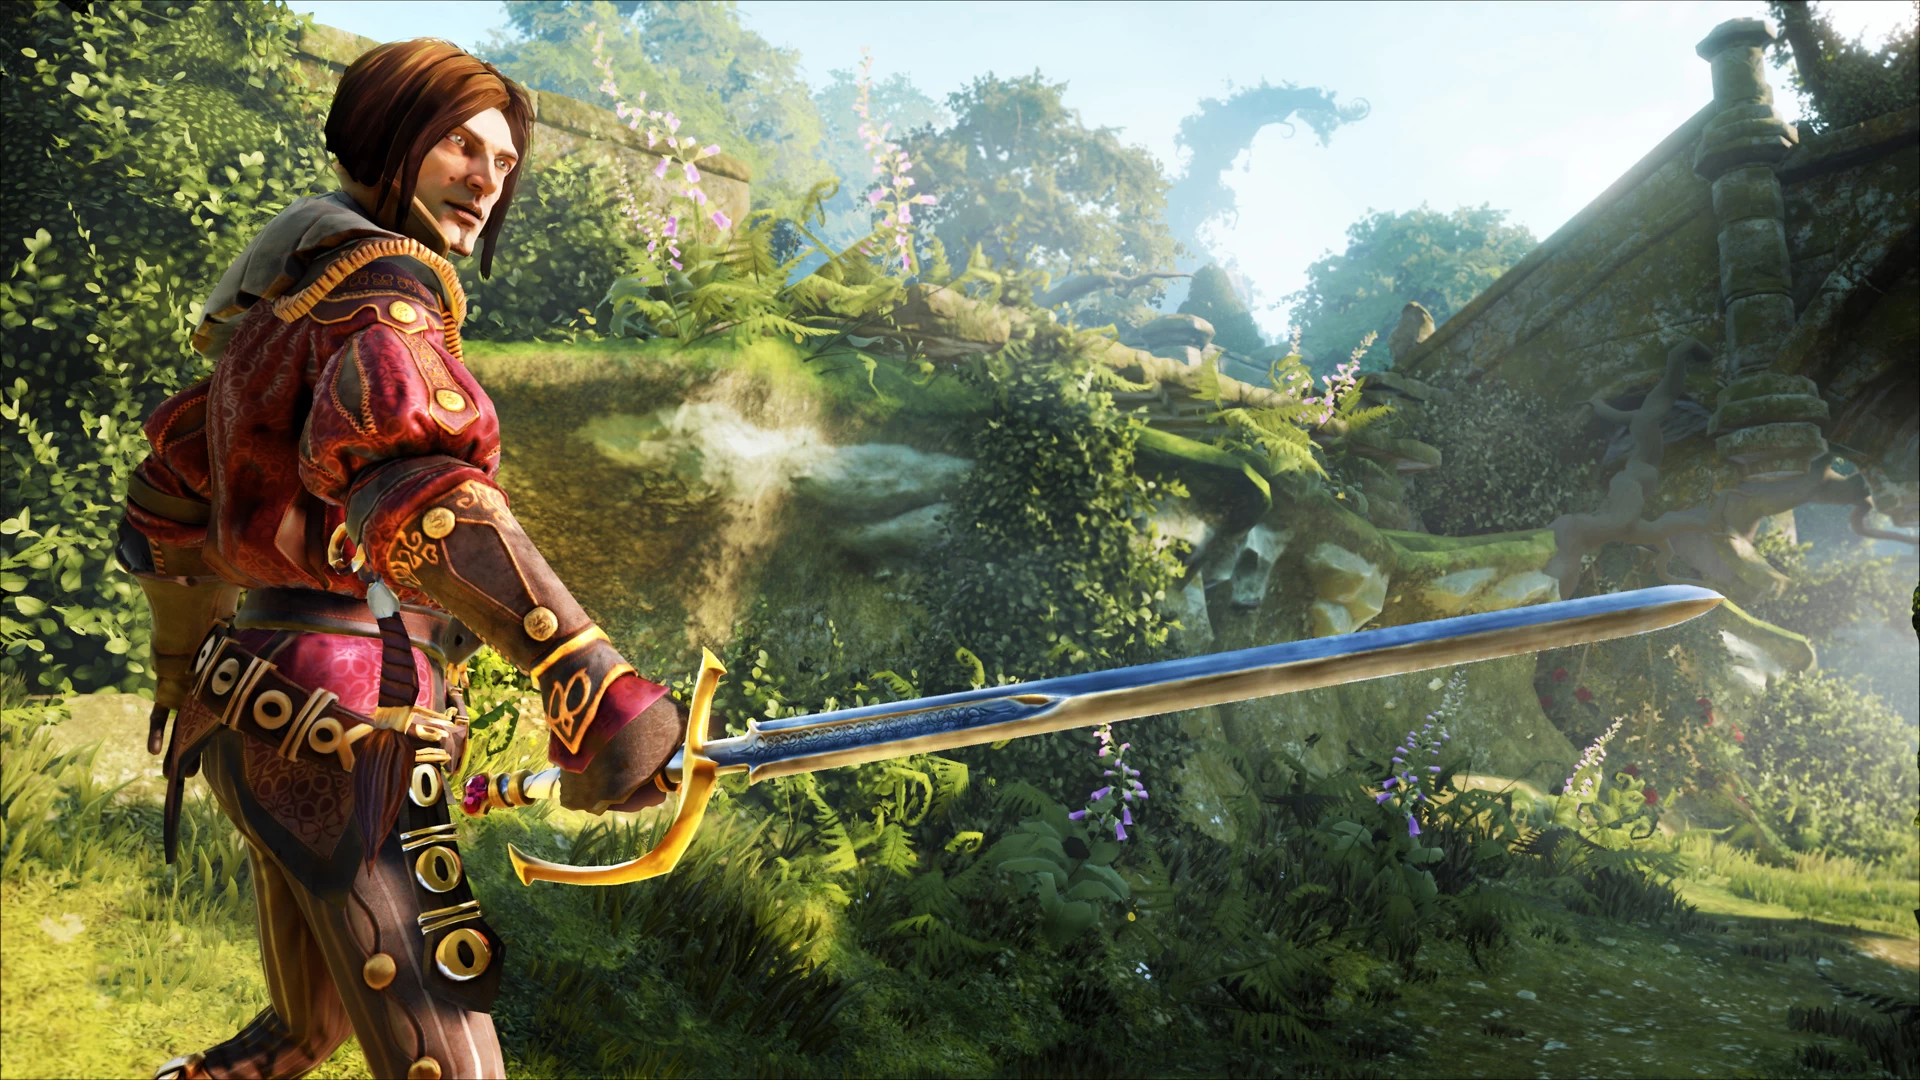 Former Lionhead Studios producer said he was “disappointed” by crunch on Fable